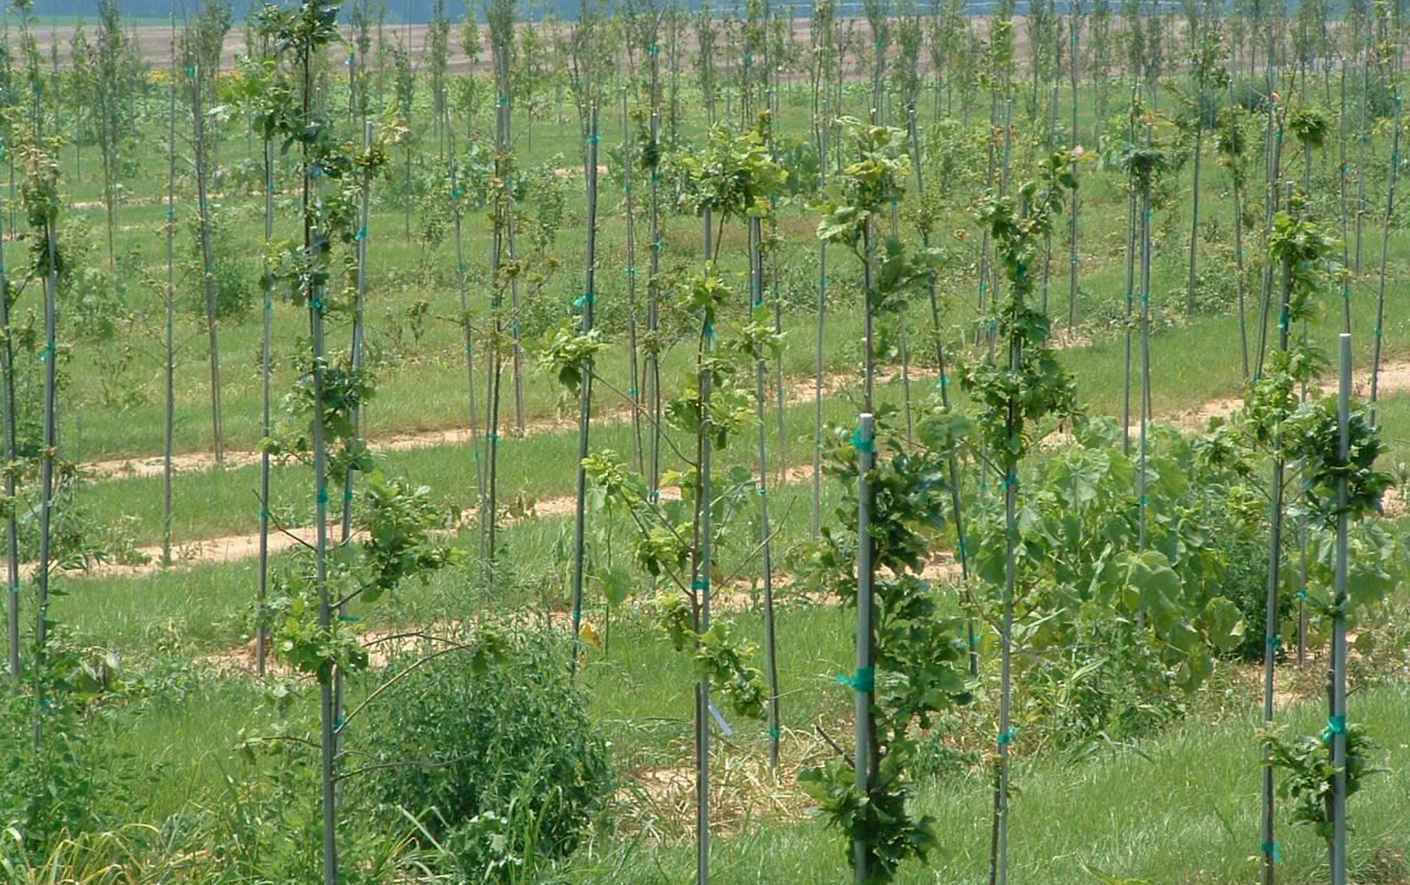 How to Stake Tomato Plants?